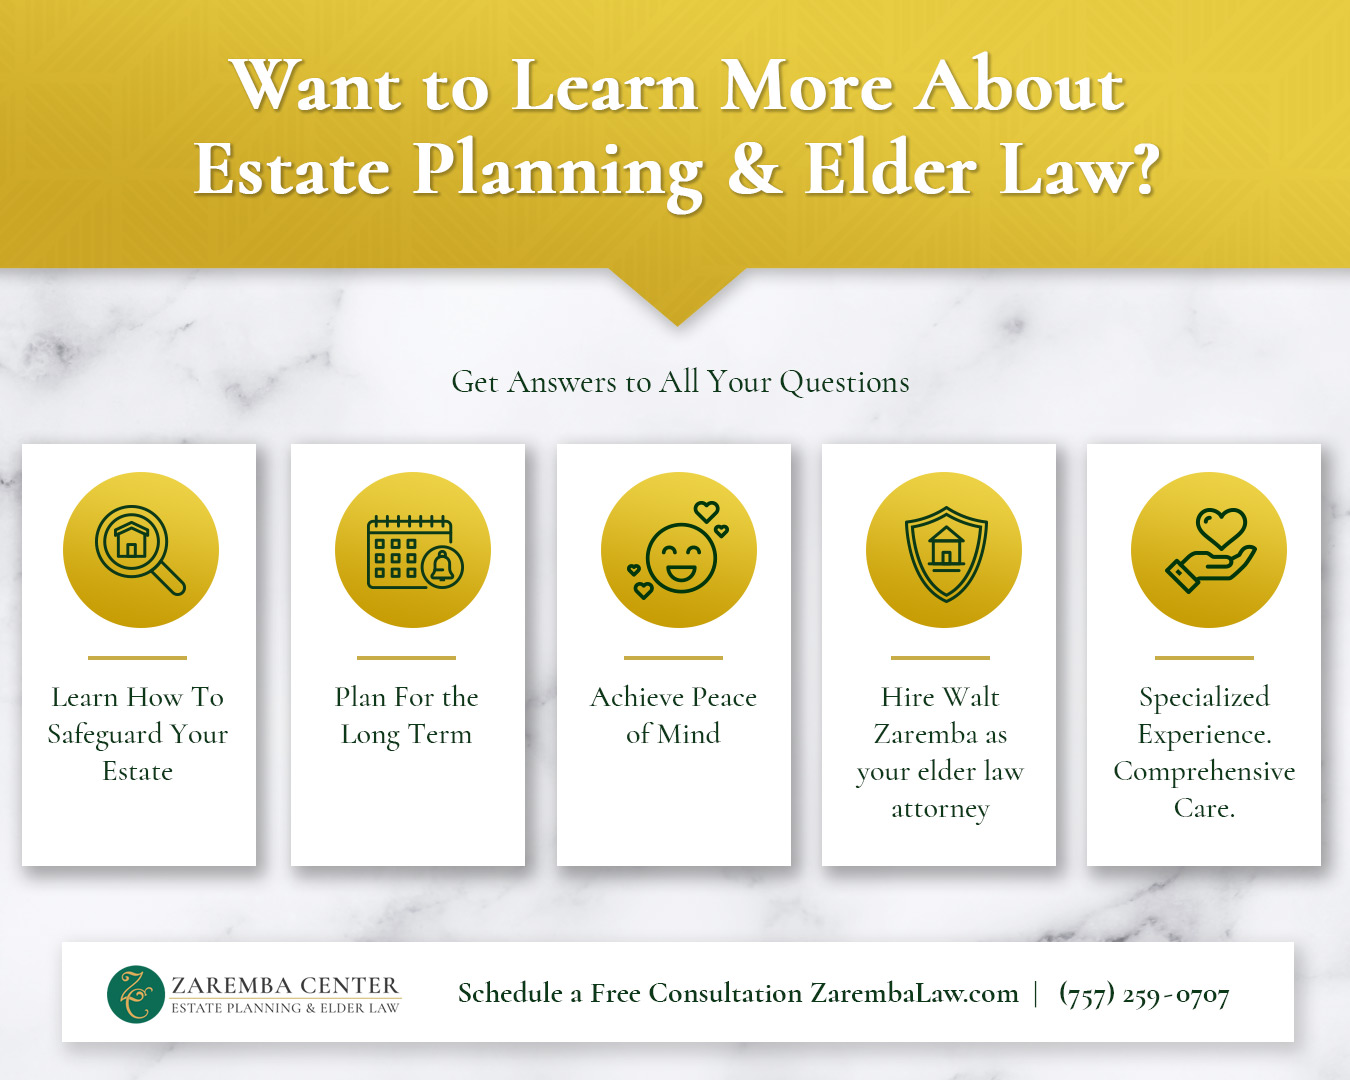 Want to Learn More About Estate Planning & Elder Law